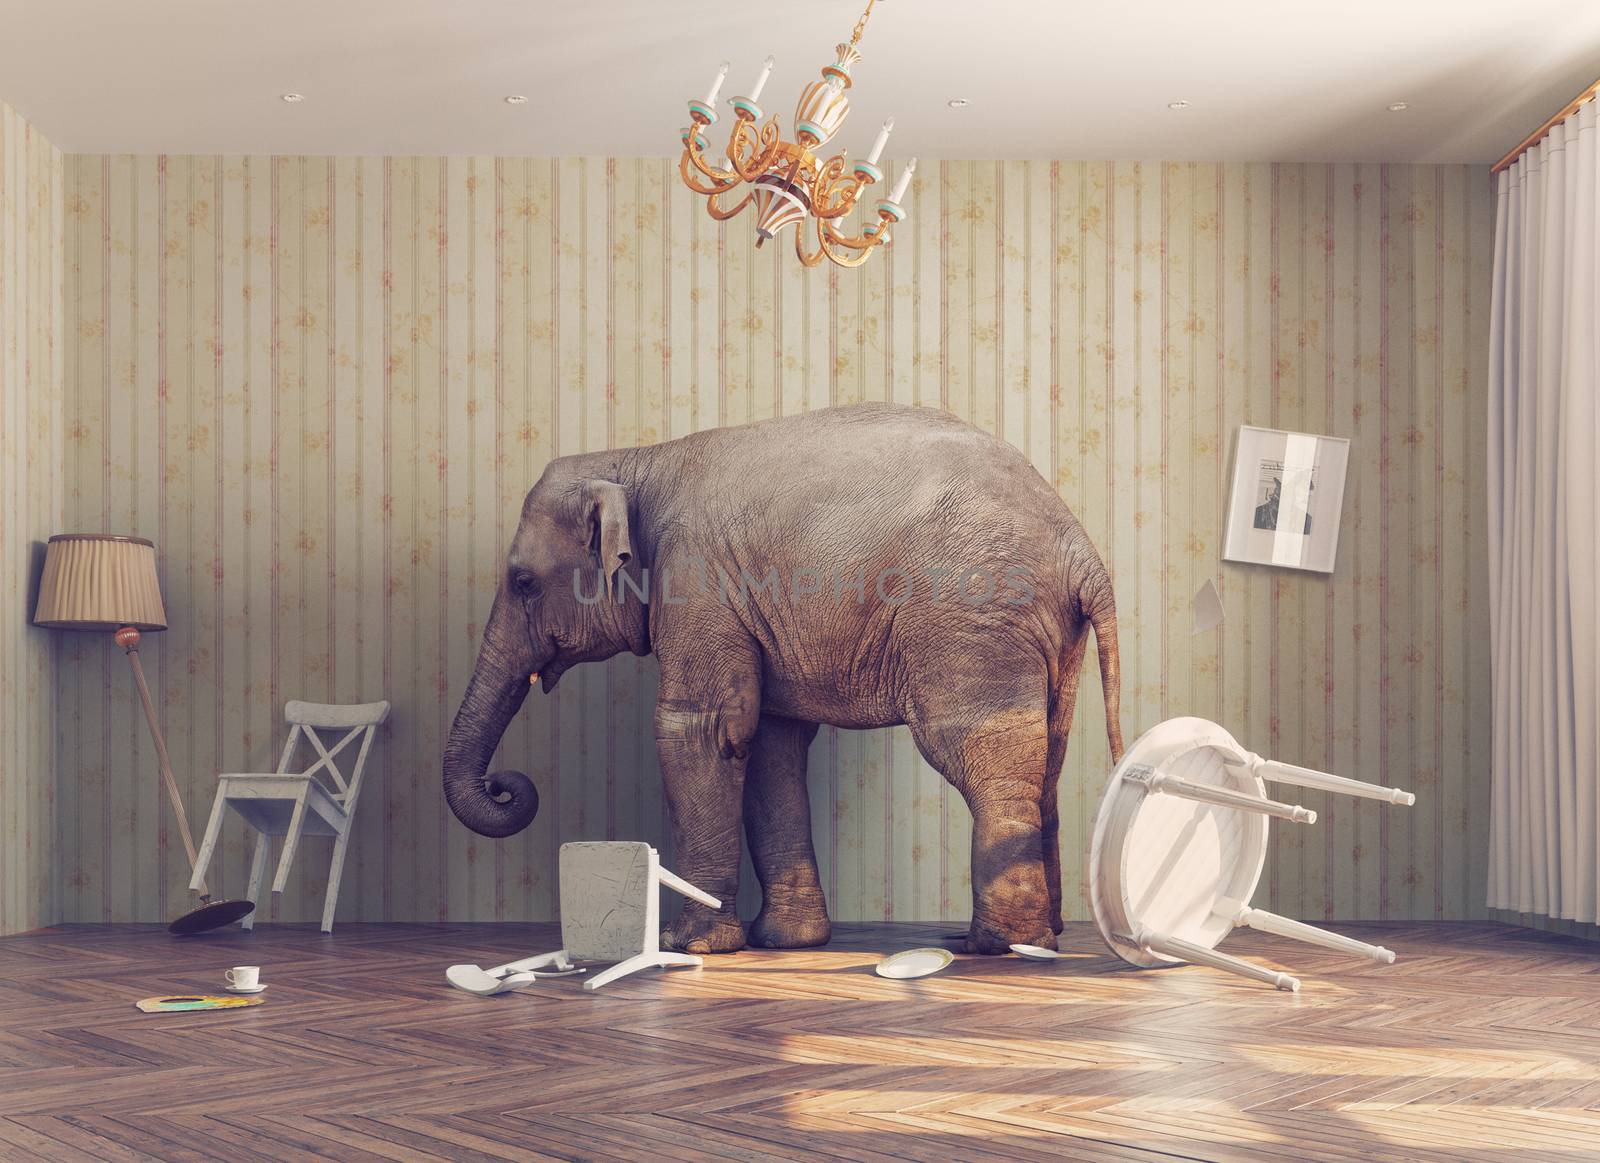 a elephant in a room by vicnt